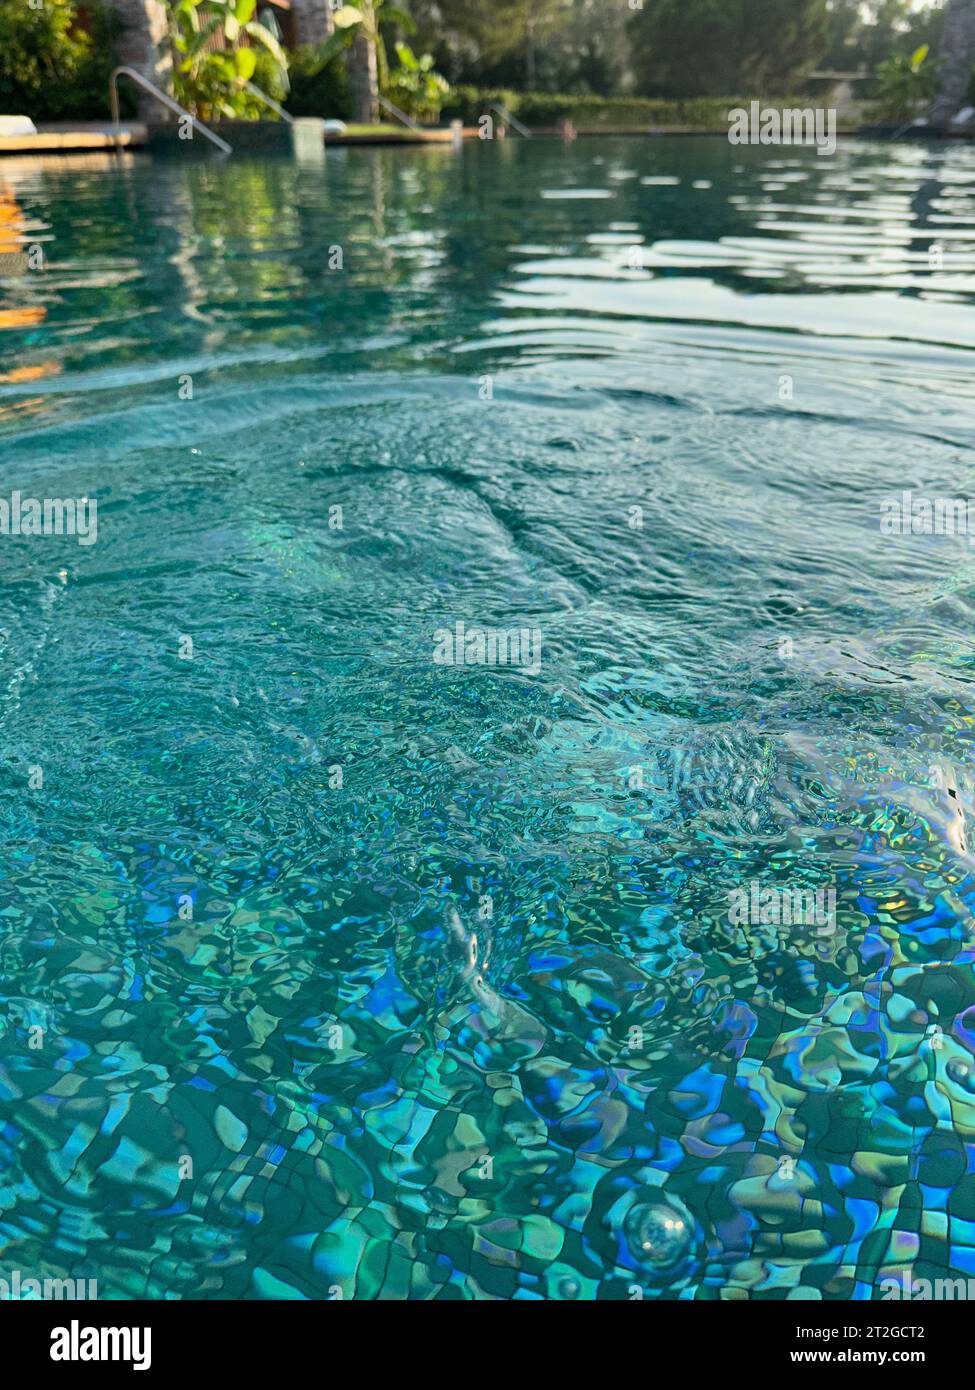 Clear rippled water in outdoor swimming pool Stock Photo